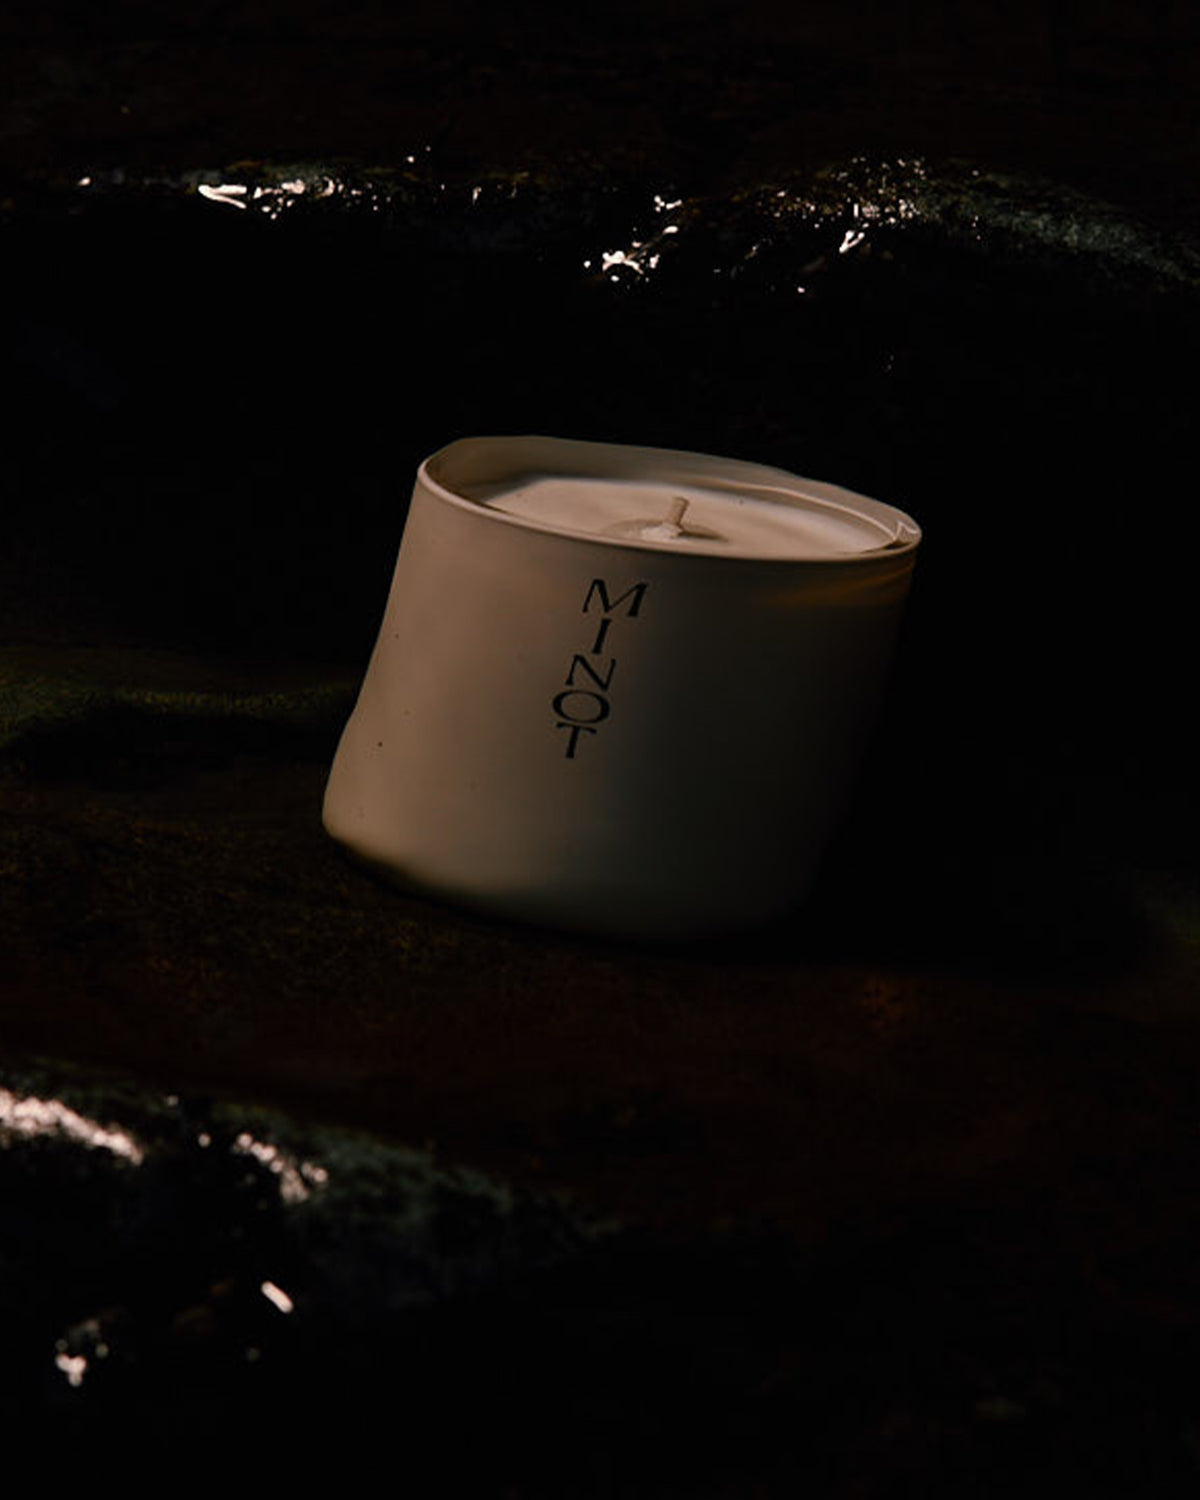 MINOT's minimalist design Dusk candle is barely visible in the dark ocean water